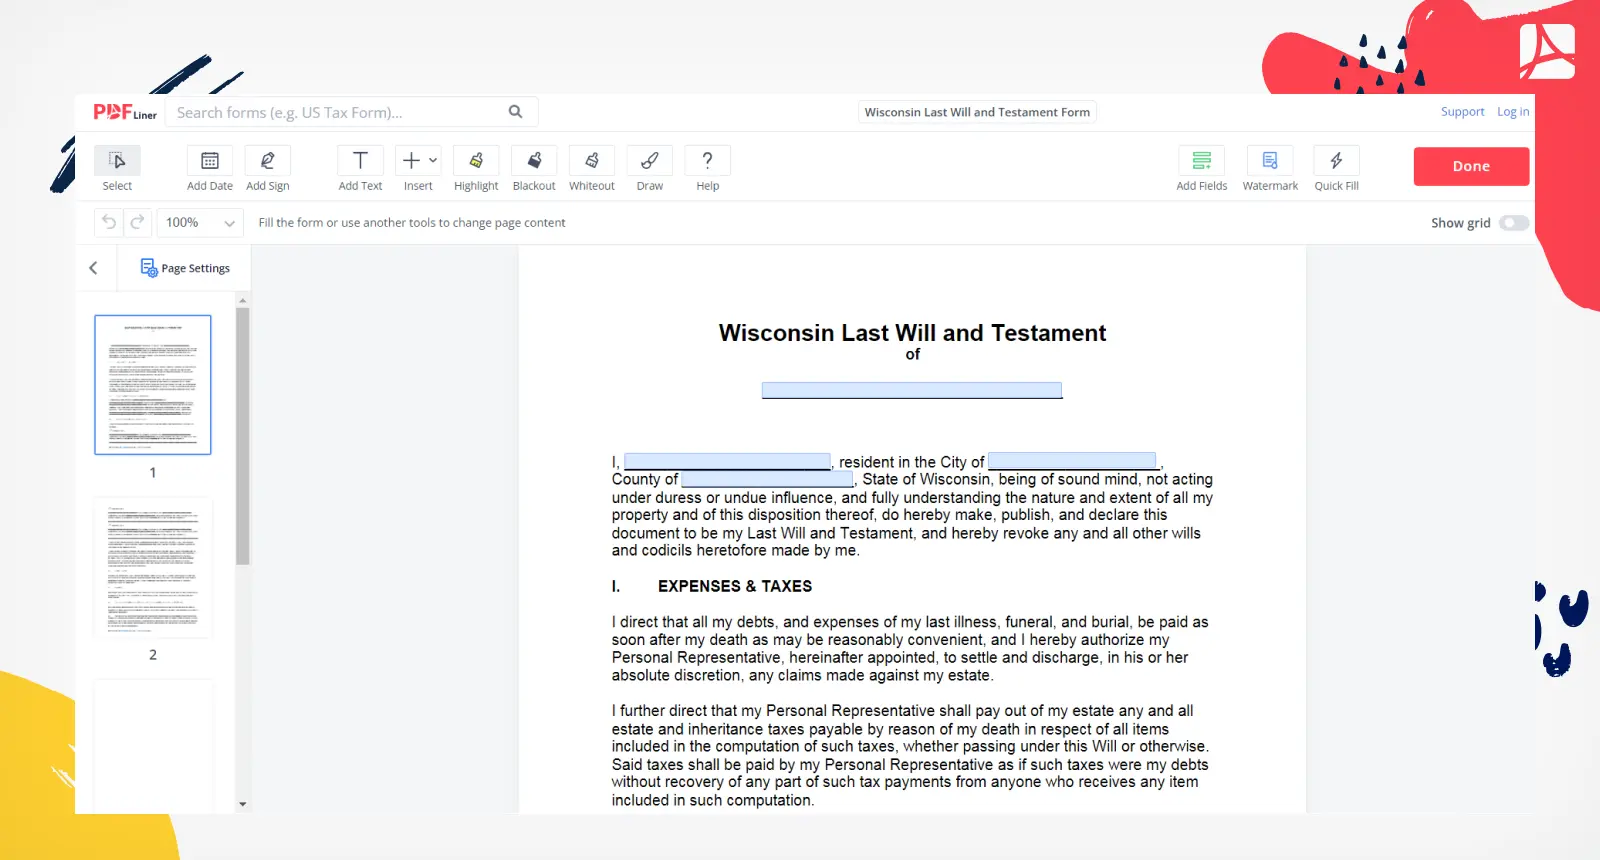 Wisconsin Last Will and Testament Form Screenshot